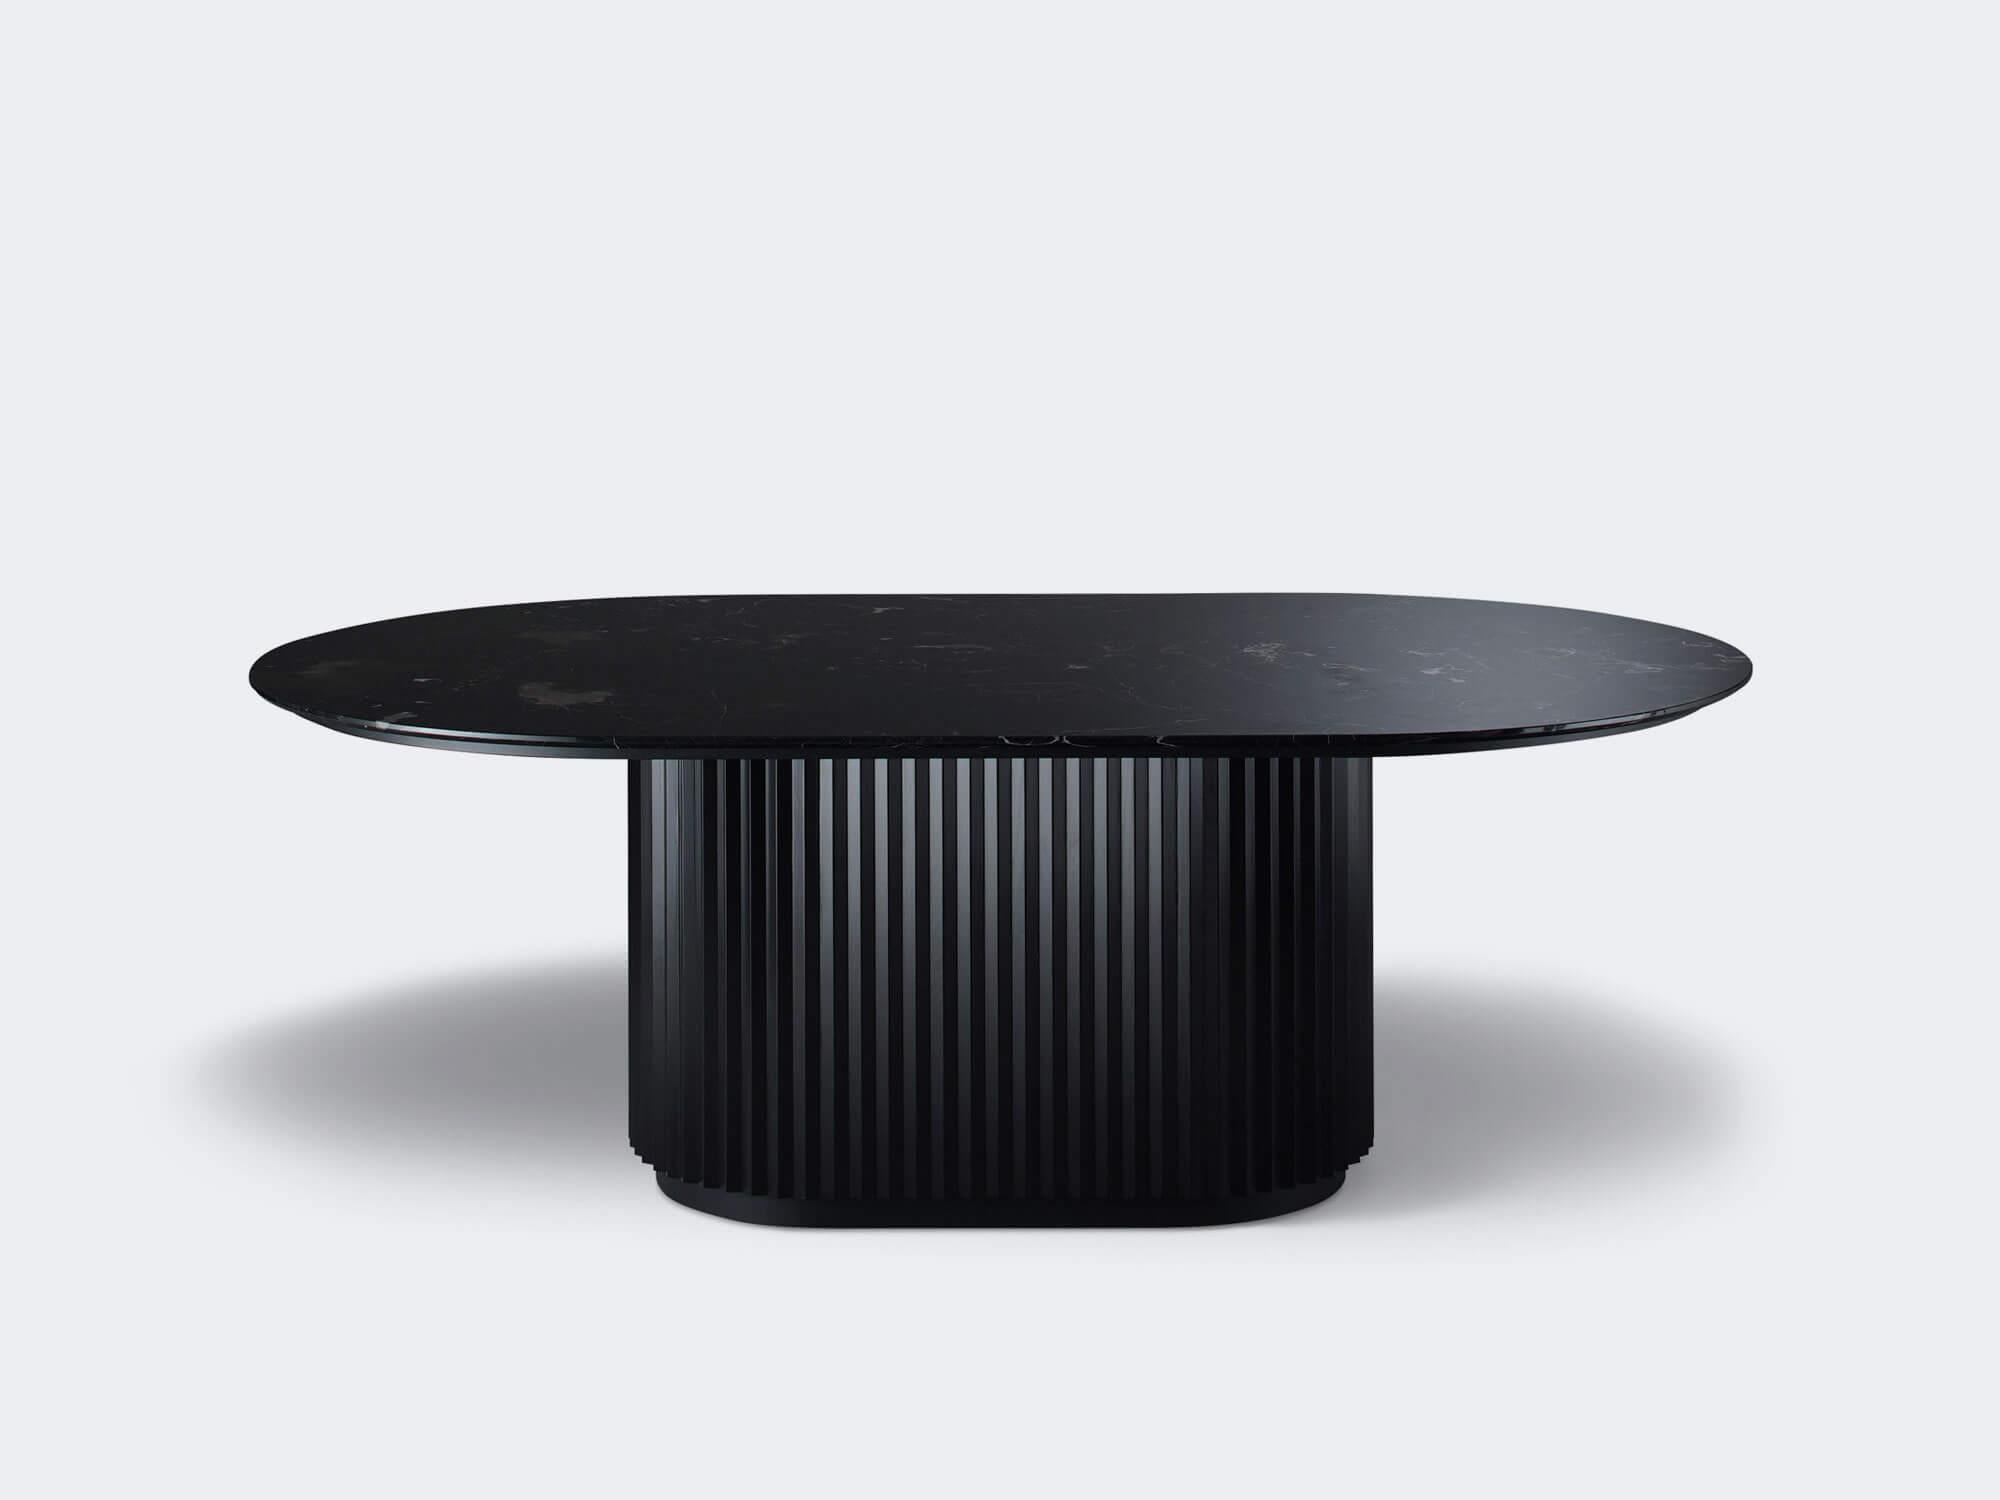 Eternel L Dining Table by Milla & Milli
Signed by Maša Vukmanović, Jelena Lukač Kirš, Jakov Šrajer
Dimensions: W 260-280 x D 130 x H 75 cm 
Materials: Ash Noir Lacquered, Black Metal, Marble Nero Marquina. 


Eternal Dining Table:
The centrepiece of